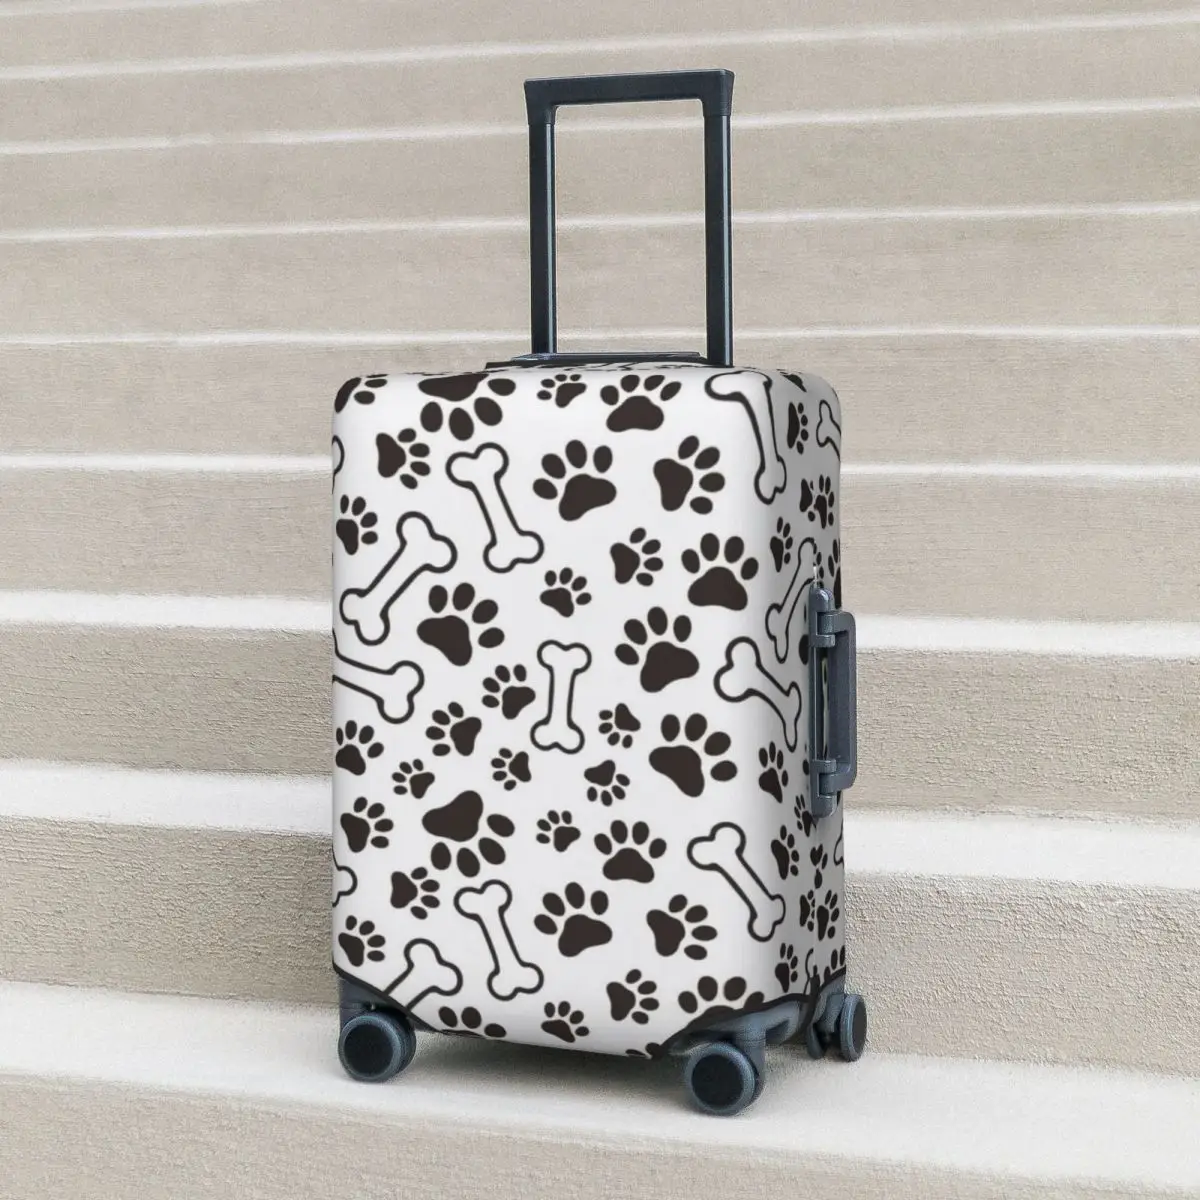 

Funny Dog Prints Suitcase Cover Vacation Animal Bone Paw Useful Luggage Supplies Travel Protector